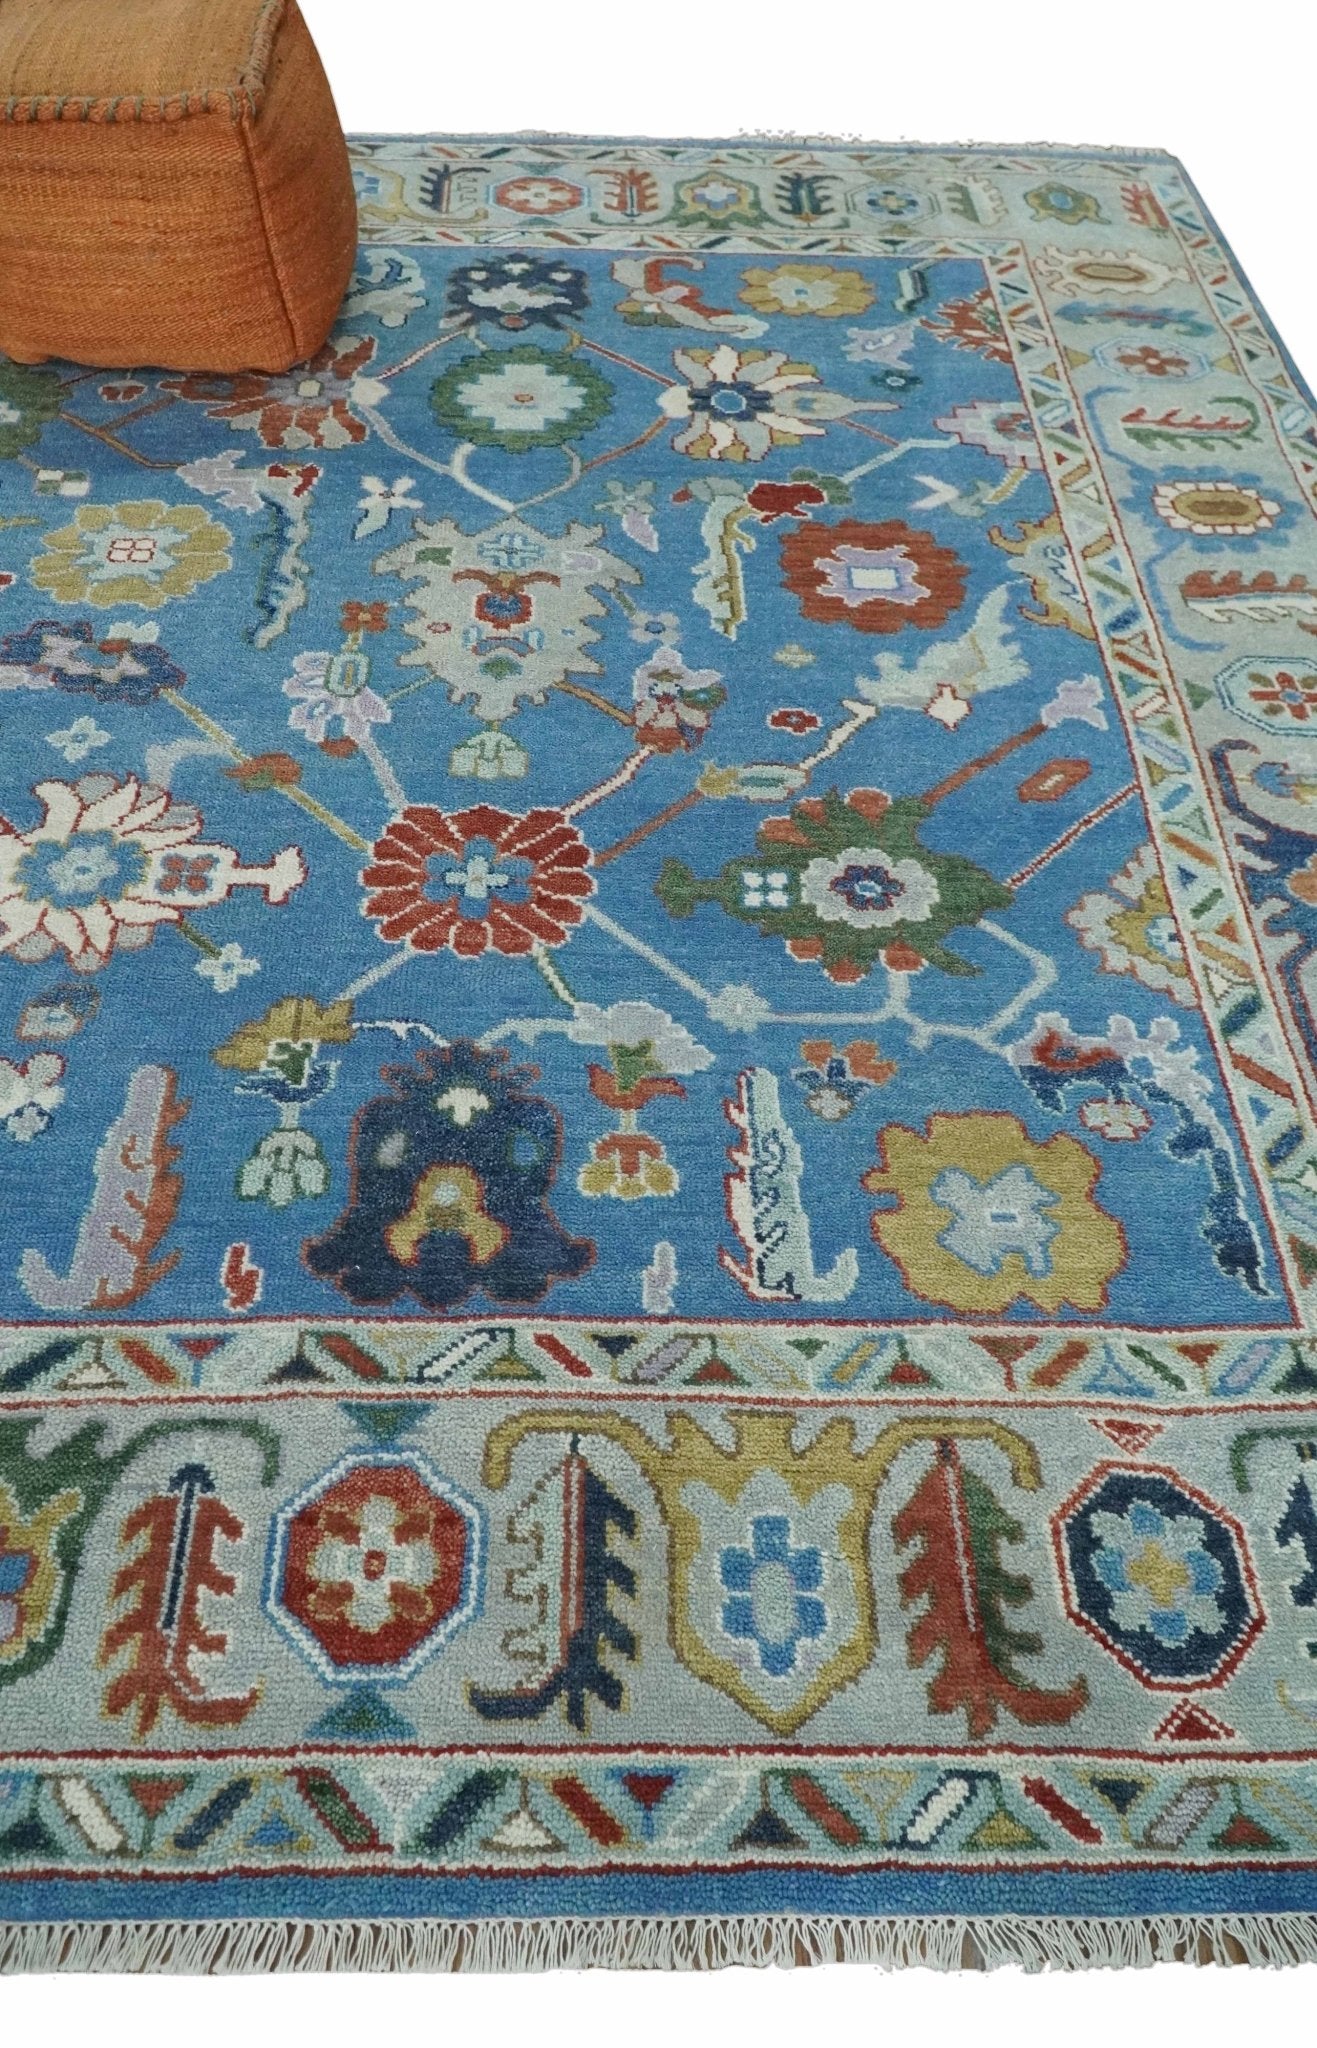 https://therugdecor.com/cdn/shop/products/modern-oushak-8x10-hand-knotted-persian-blue-rust-and-ivory-colorful-wool-area-rug-trdcp848810-963906.jpg?v=1655130139